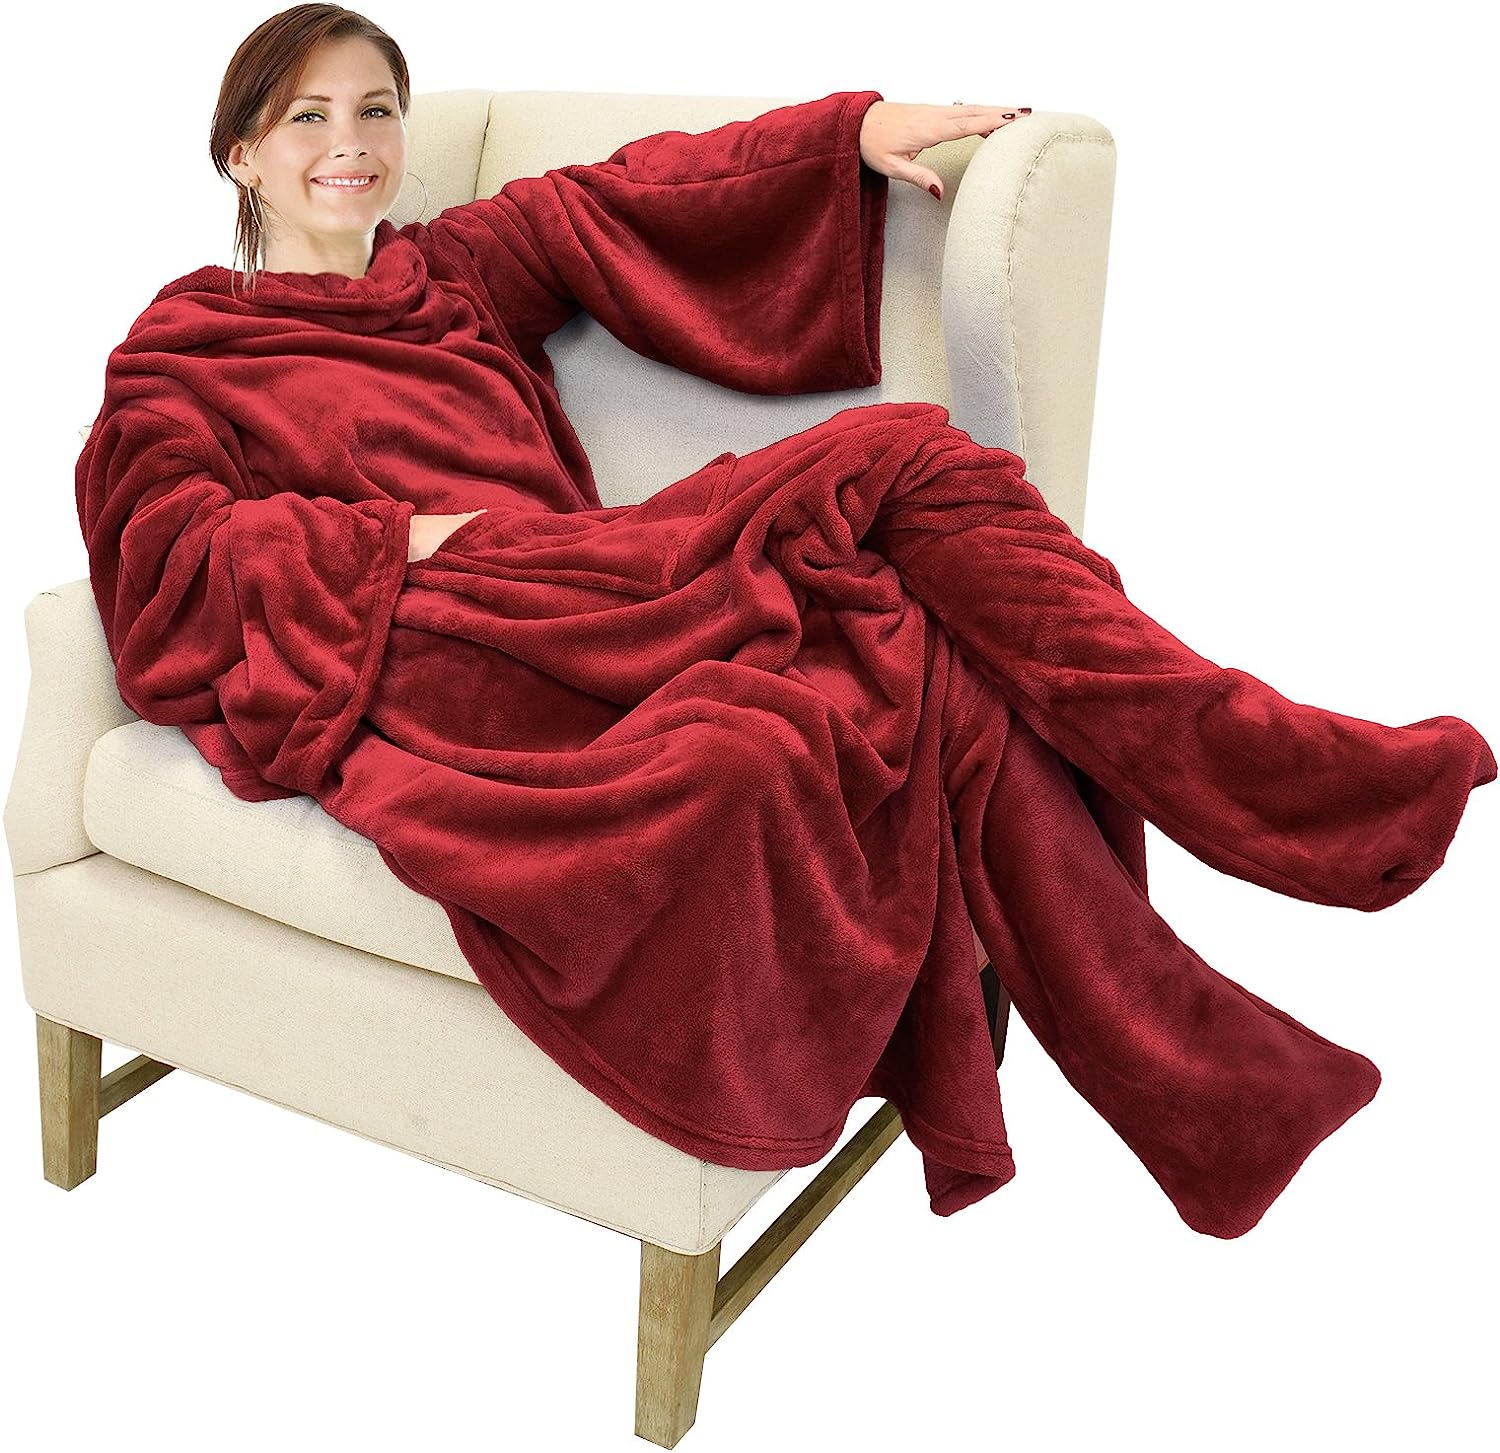 Catalonia Wearable Fleece Blanket with Sleeves and Foot Pockets for Adult Women Men, Micro Plush Comfy Wrap Sleeved Throw Blanket Robe Large, Wine